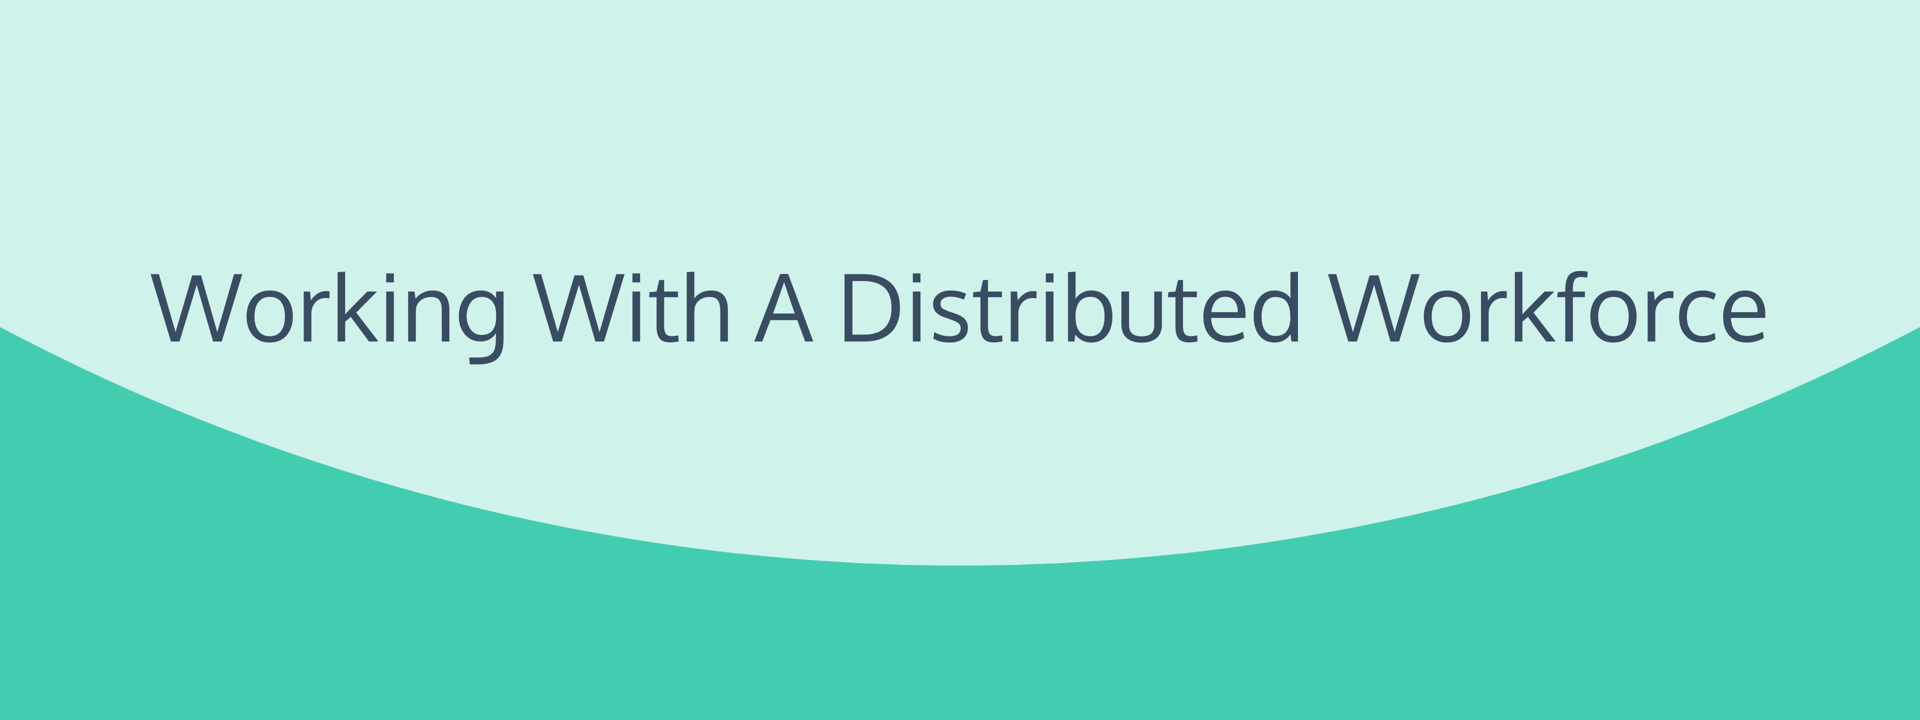 Working With a Distributed Workforce